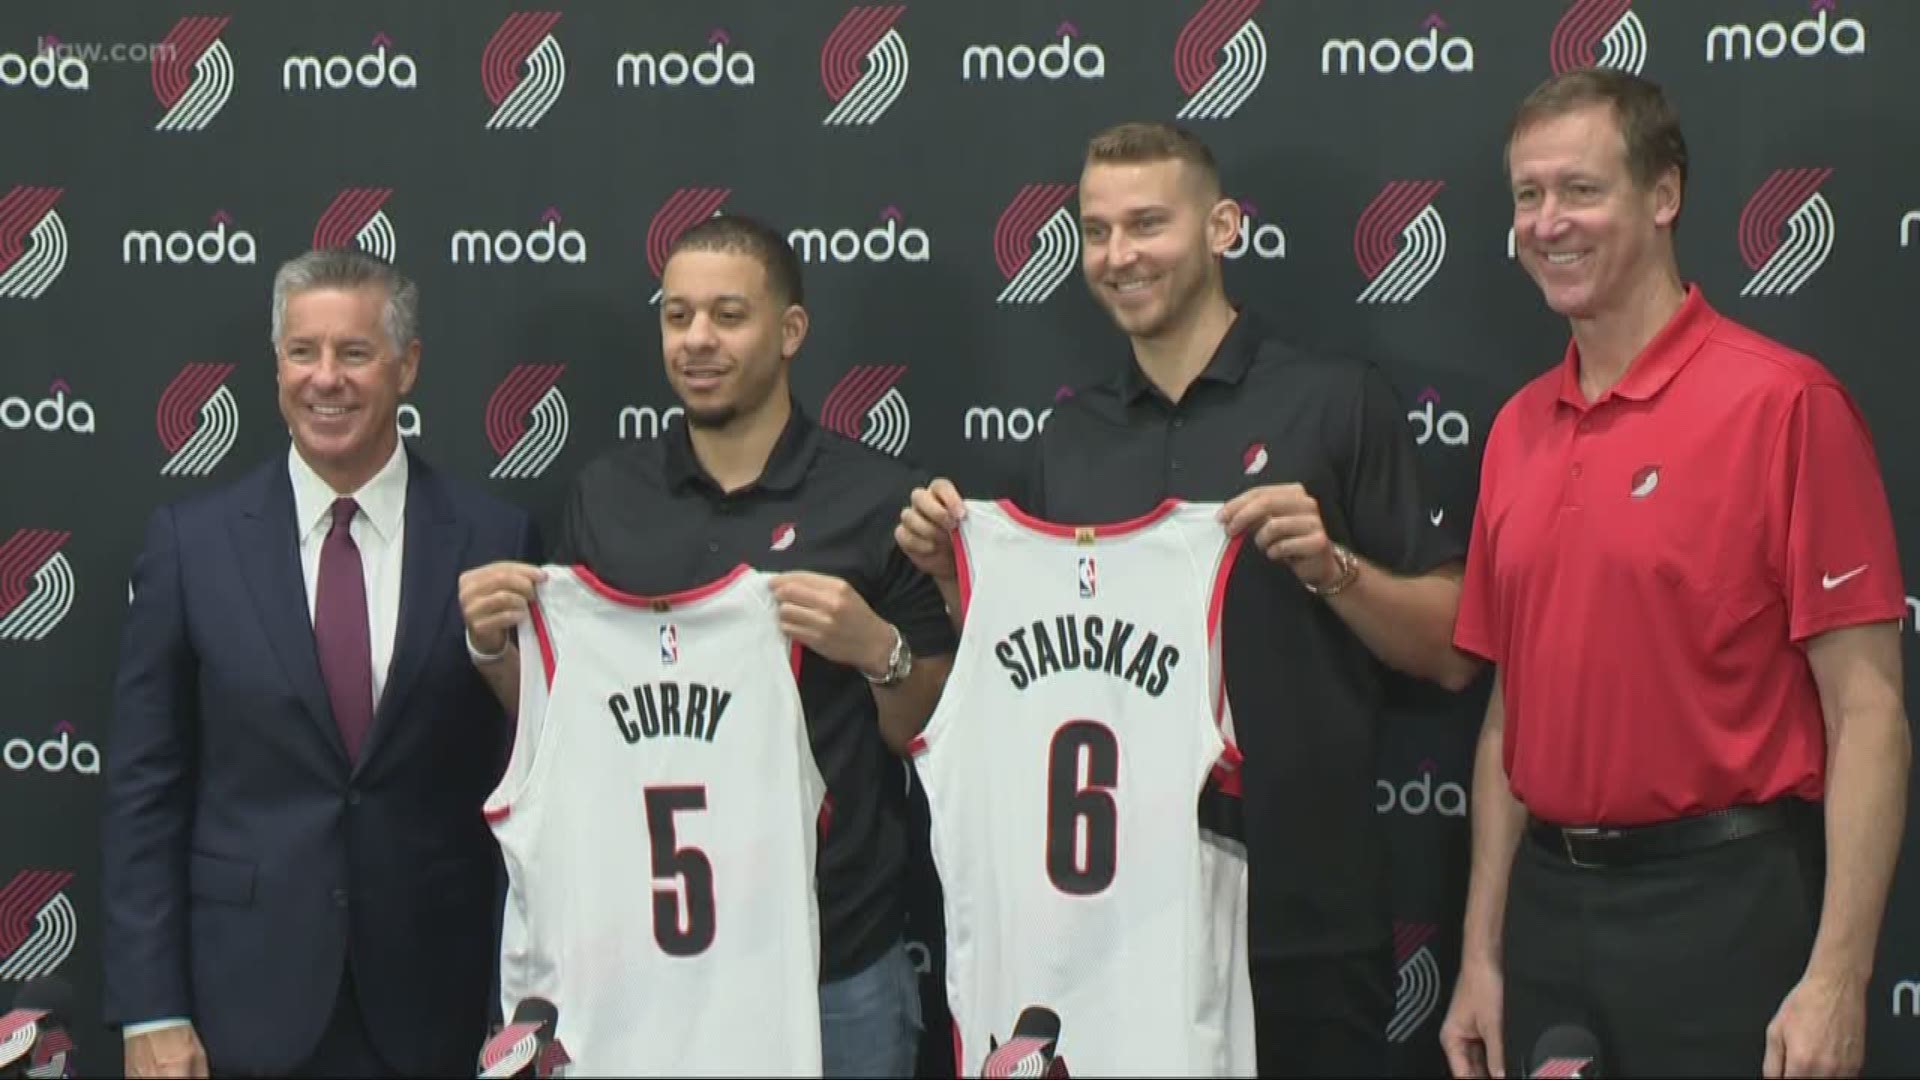 The Blazers introduced their new signings.